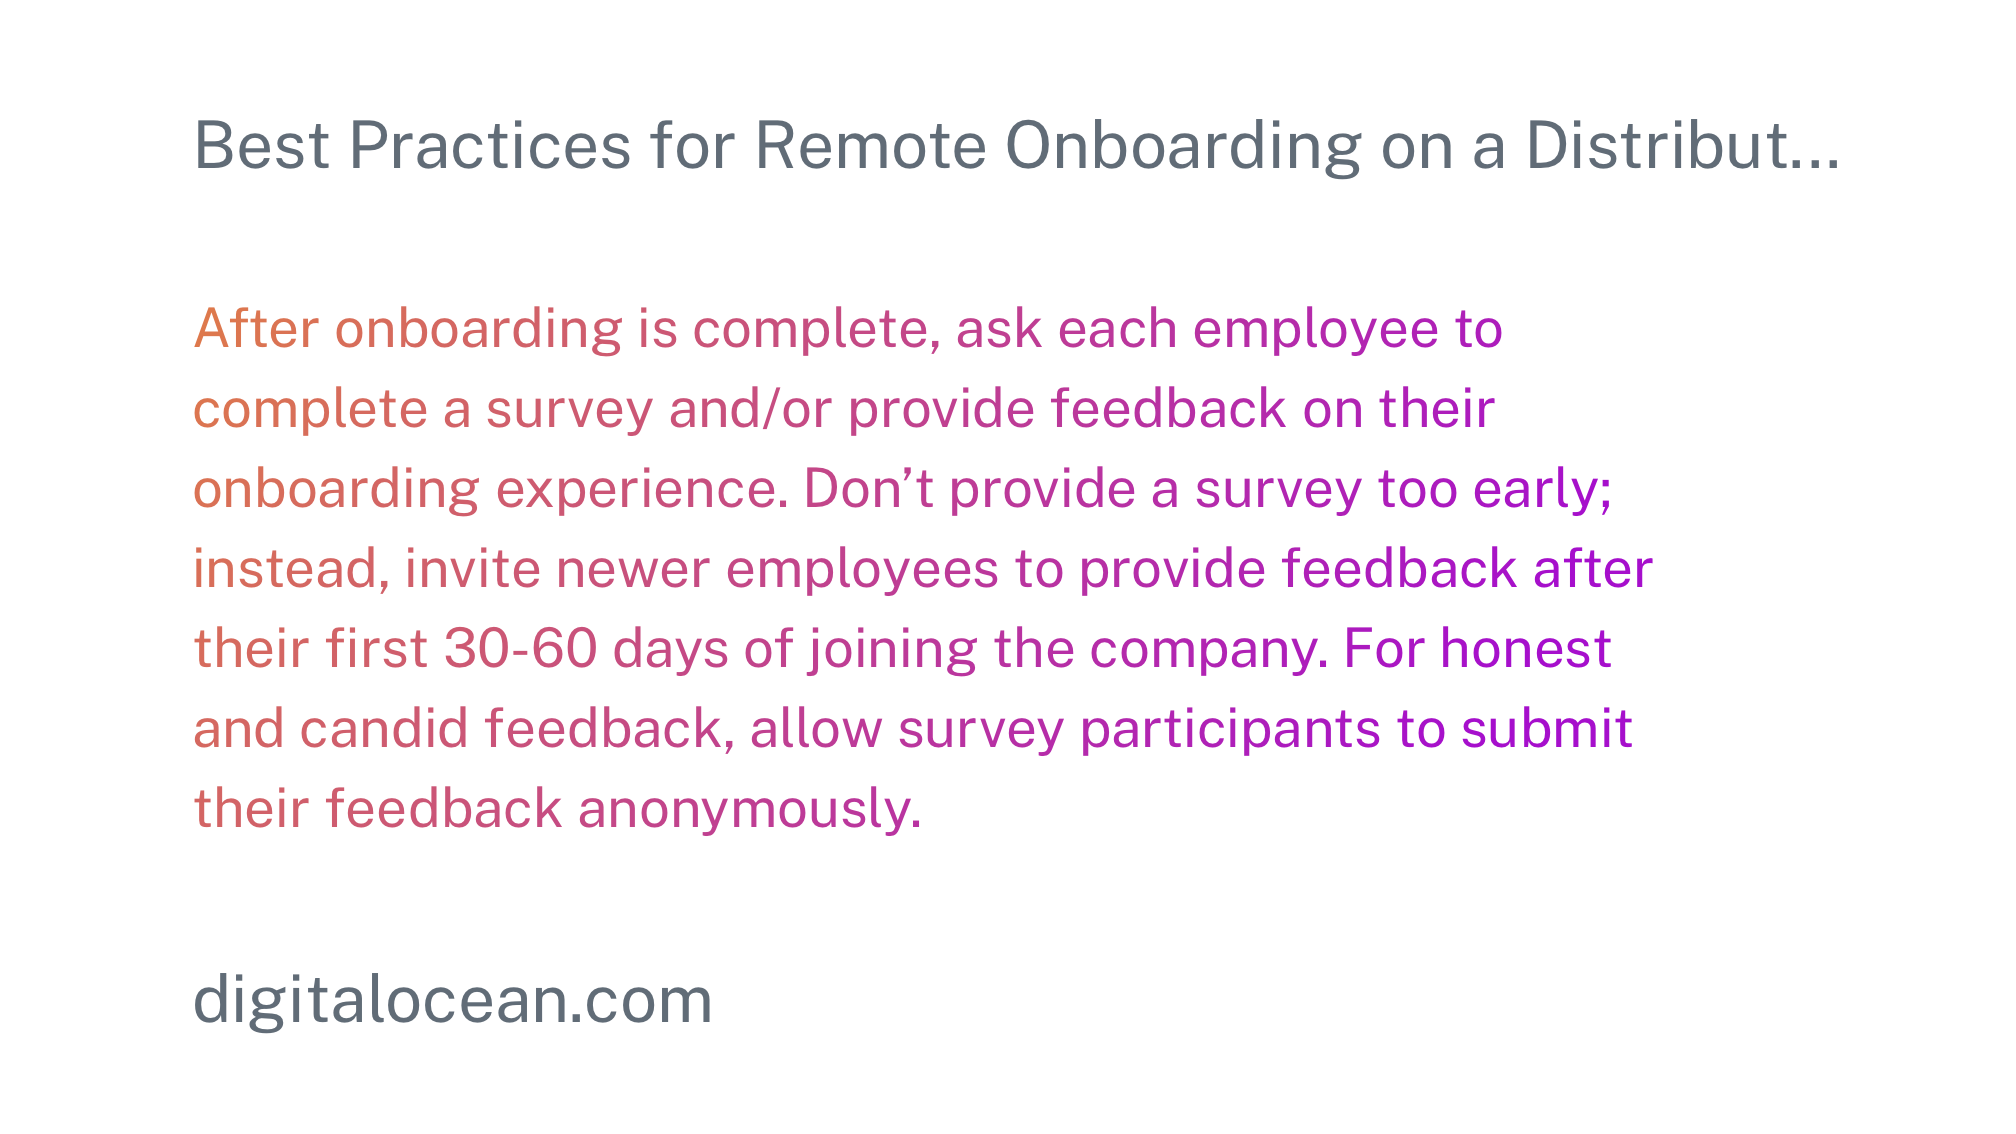 An image with a quote from DigitalOcean. It says: "After onboarding is complete, ask each employee to complete a survey and/or provide feedback on their onboarding experience. Don't provide a survey too early; instead, invite newer employees to provide feedback after their first 30-60 days of joining the company. For honest and candid feedback, allow survey participants to submit their feedback anonymously."